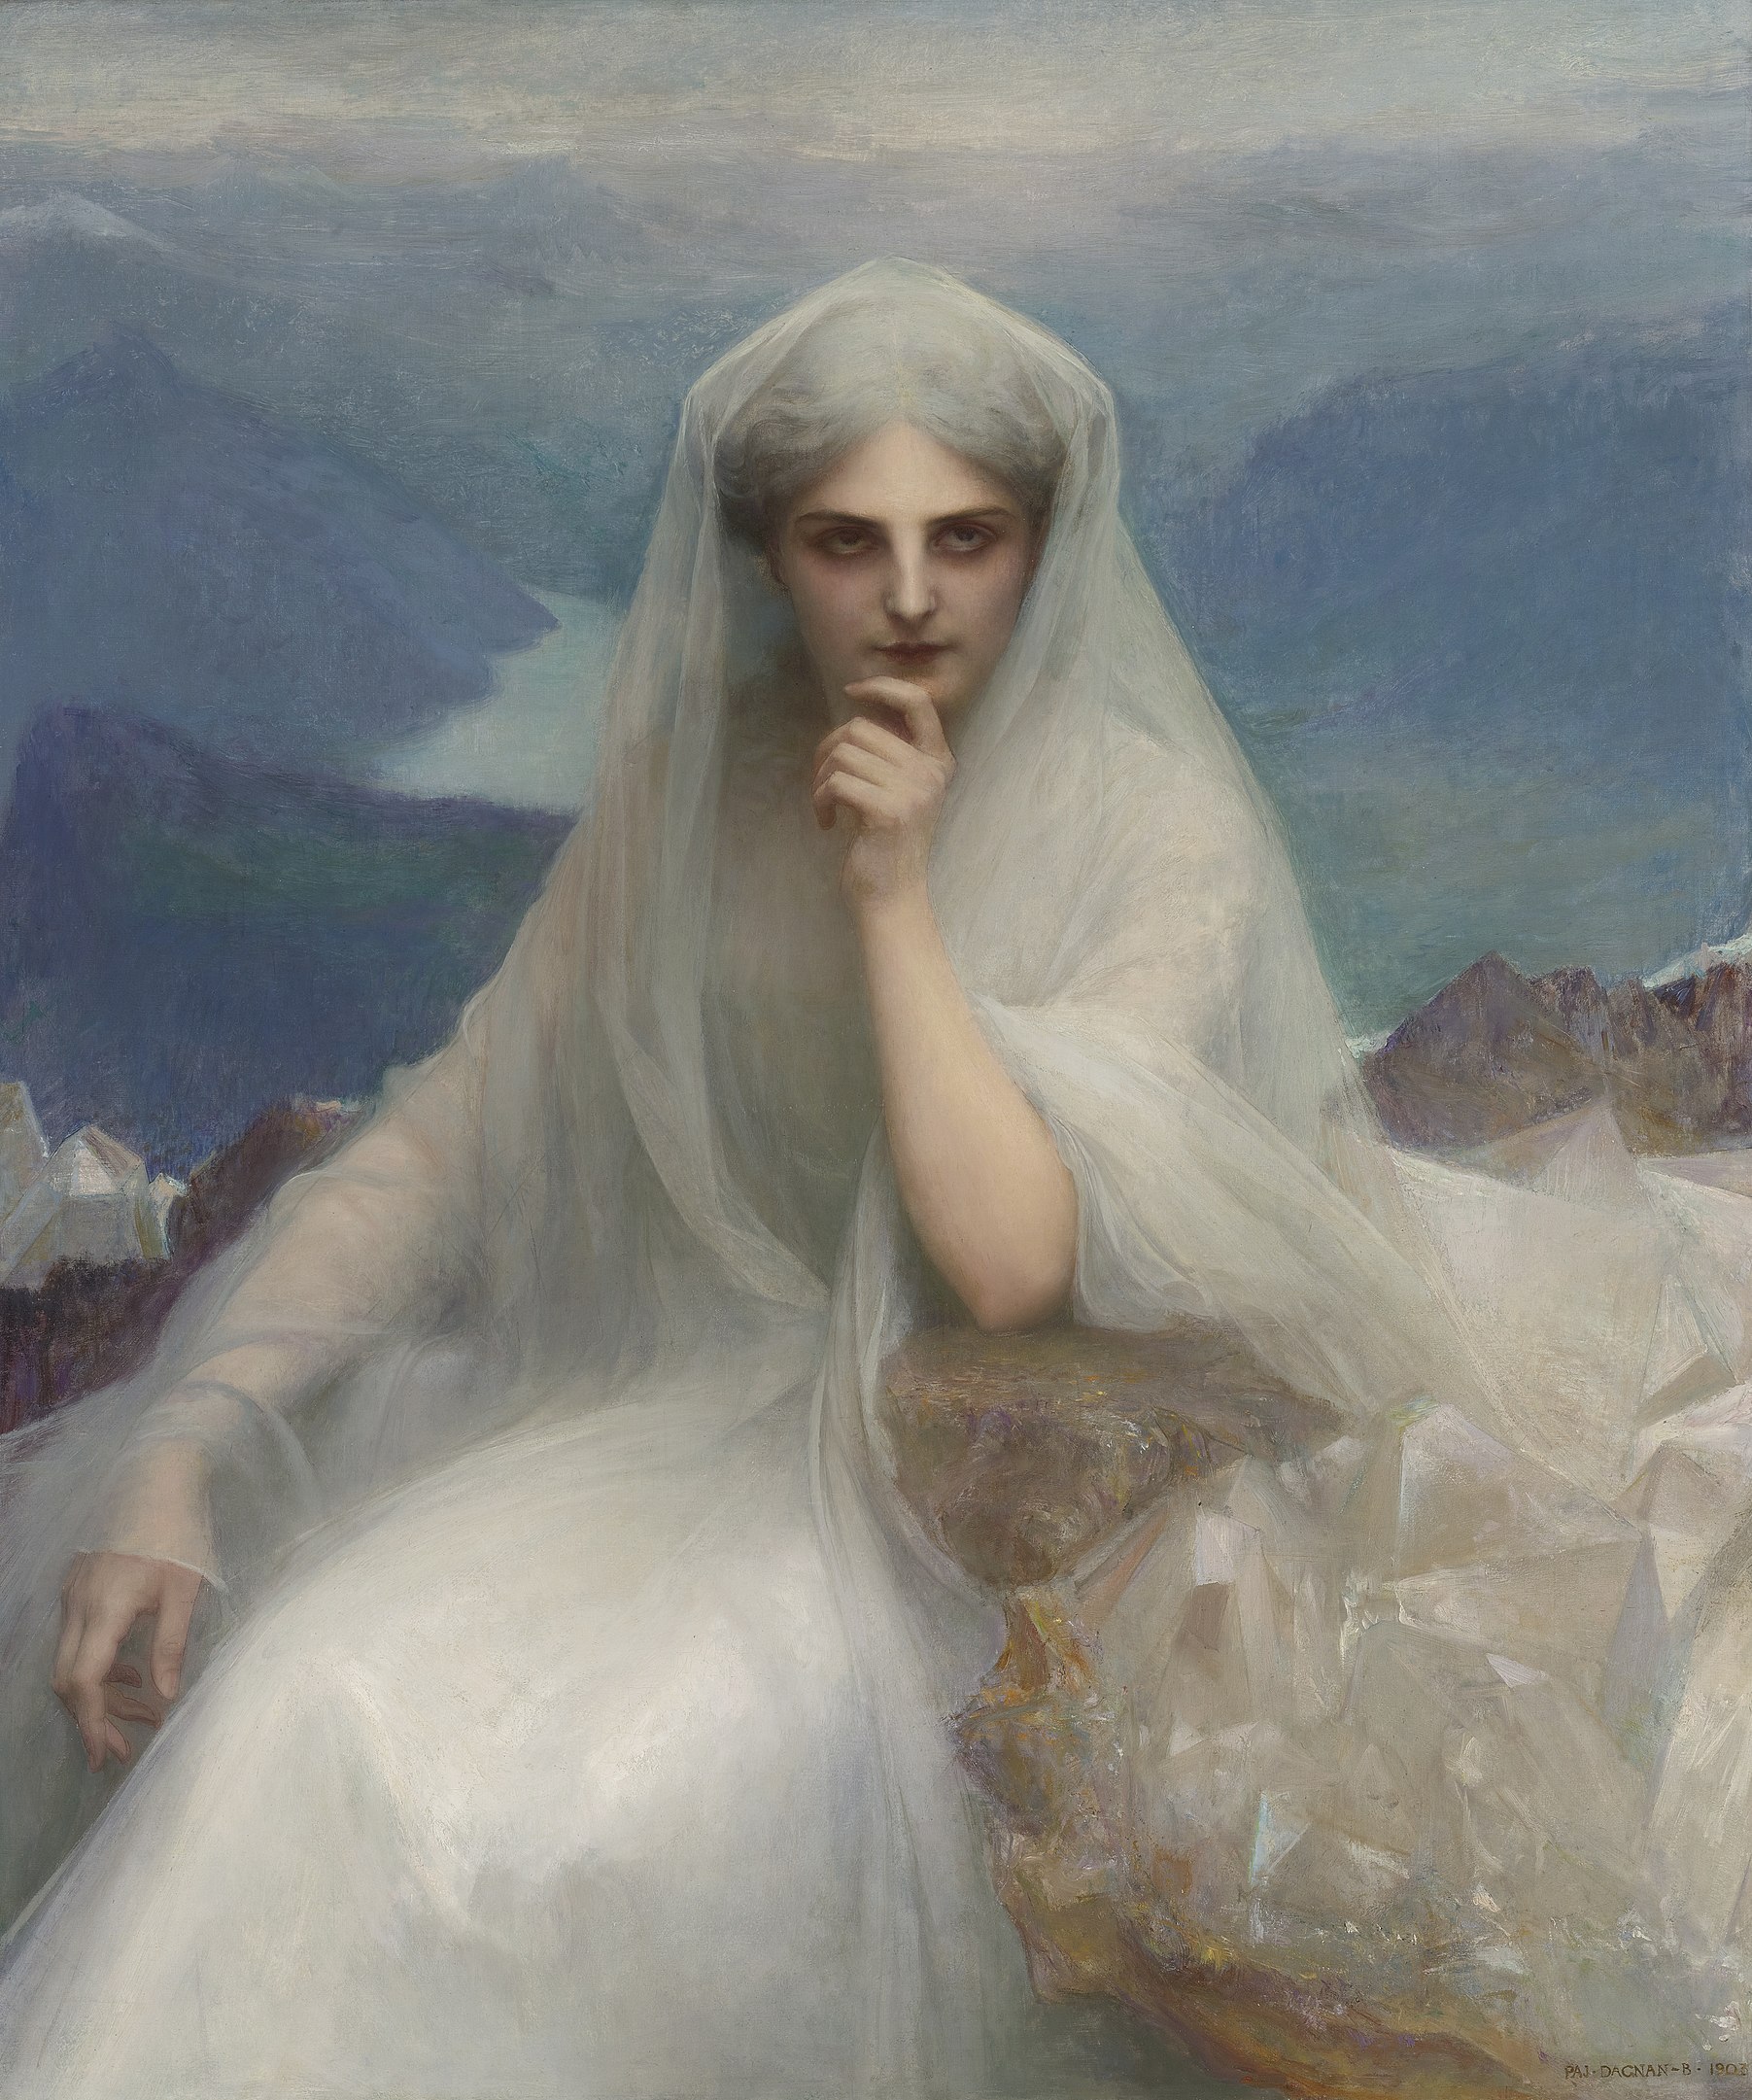 A woman wearing a veil pondering deeply in the mountains